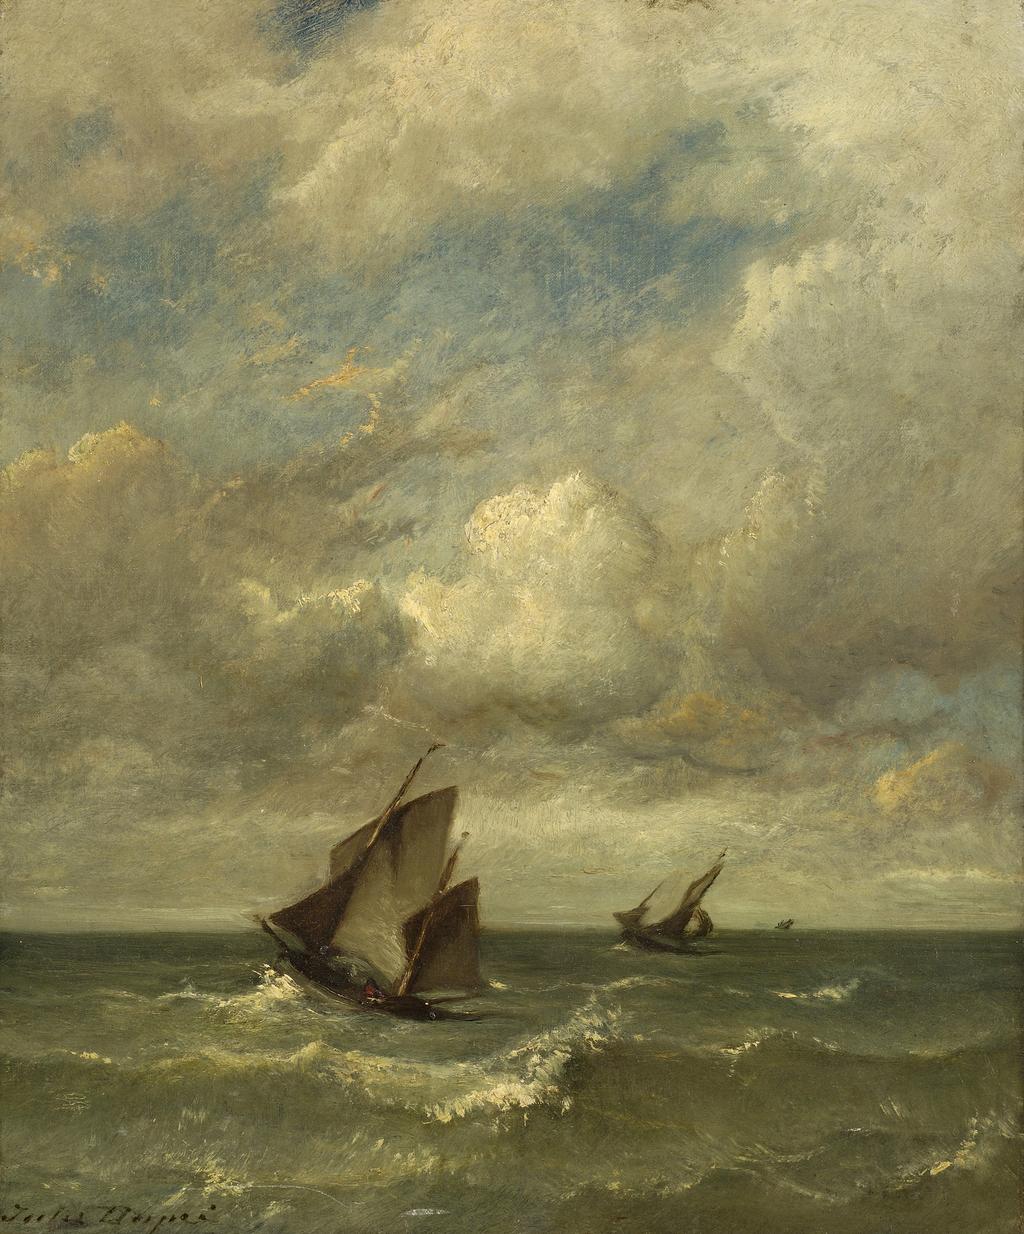 An image of Shipping in a breeze. Dupré, Jules (French, 1811-1889). Oil on canvas, height 46.3 cm, width 38.7 cm.